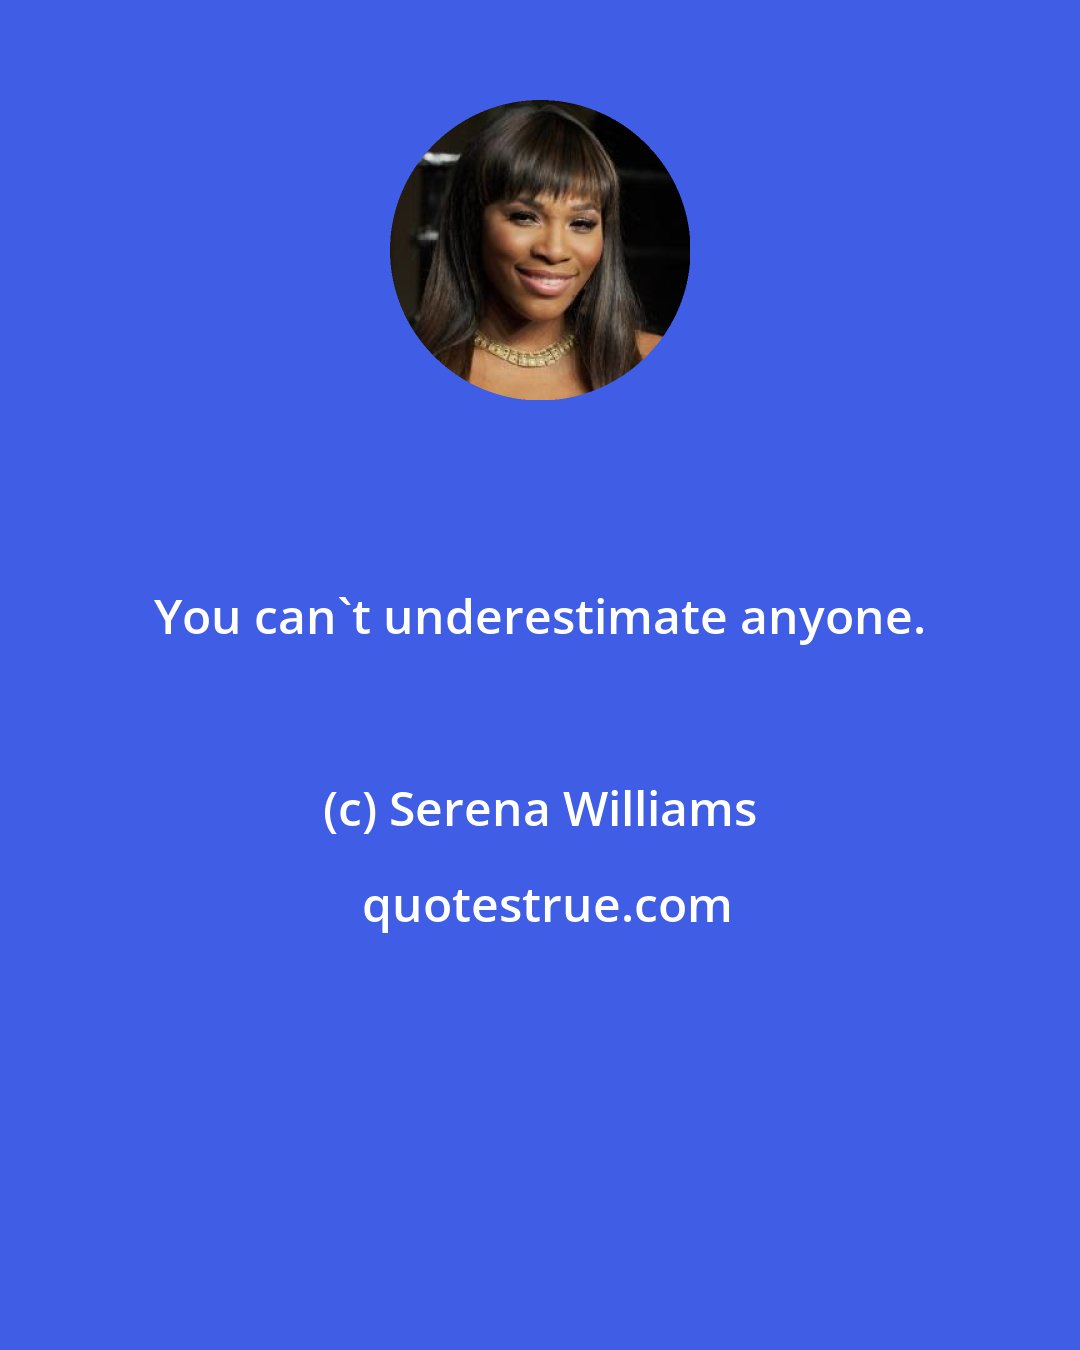 Serena Williams: You can't underestimate anyone.